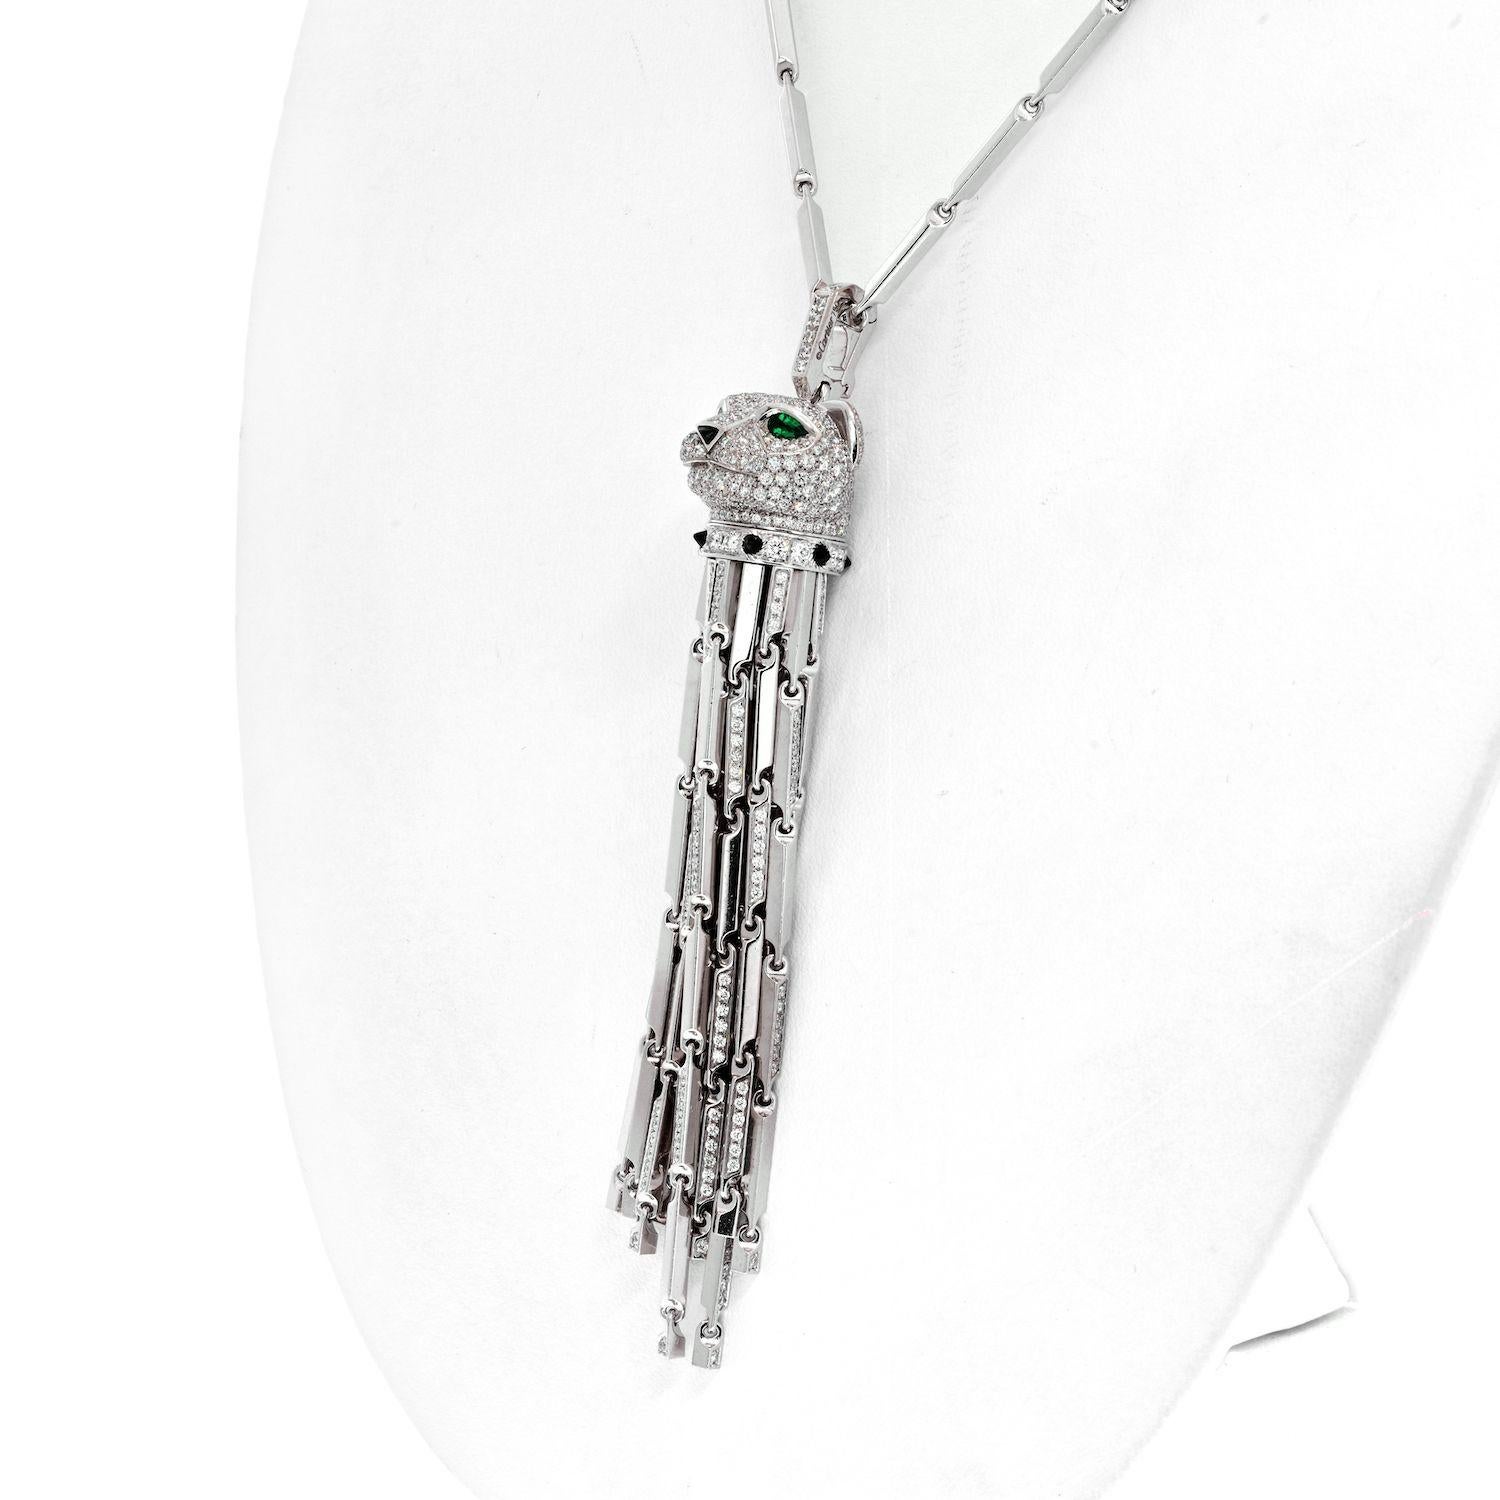 The Cartier Panthere tassel pendant with black enamel, black onyx, and set with round diamonds is a stunning piece of jewelry. The F/G color and VVS-VS clarity of the diamonds ensure that the pendant sparkles and catches the eye. The pear-shaped